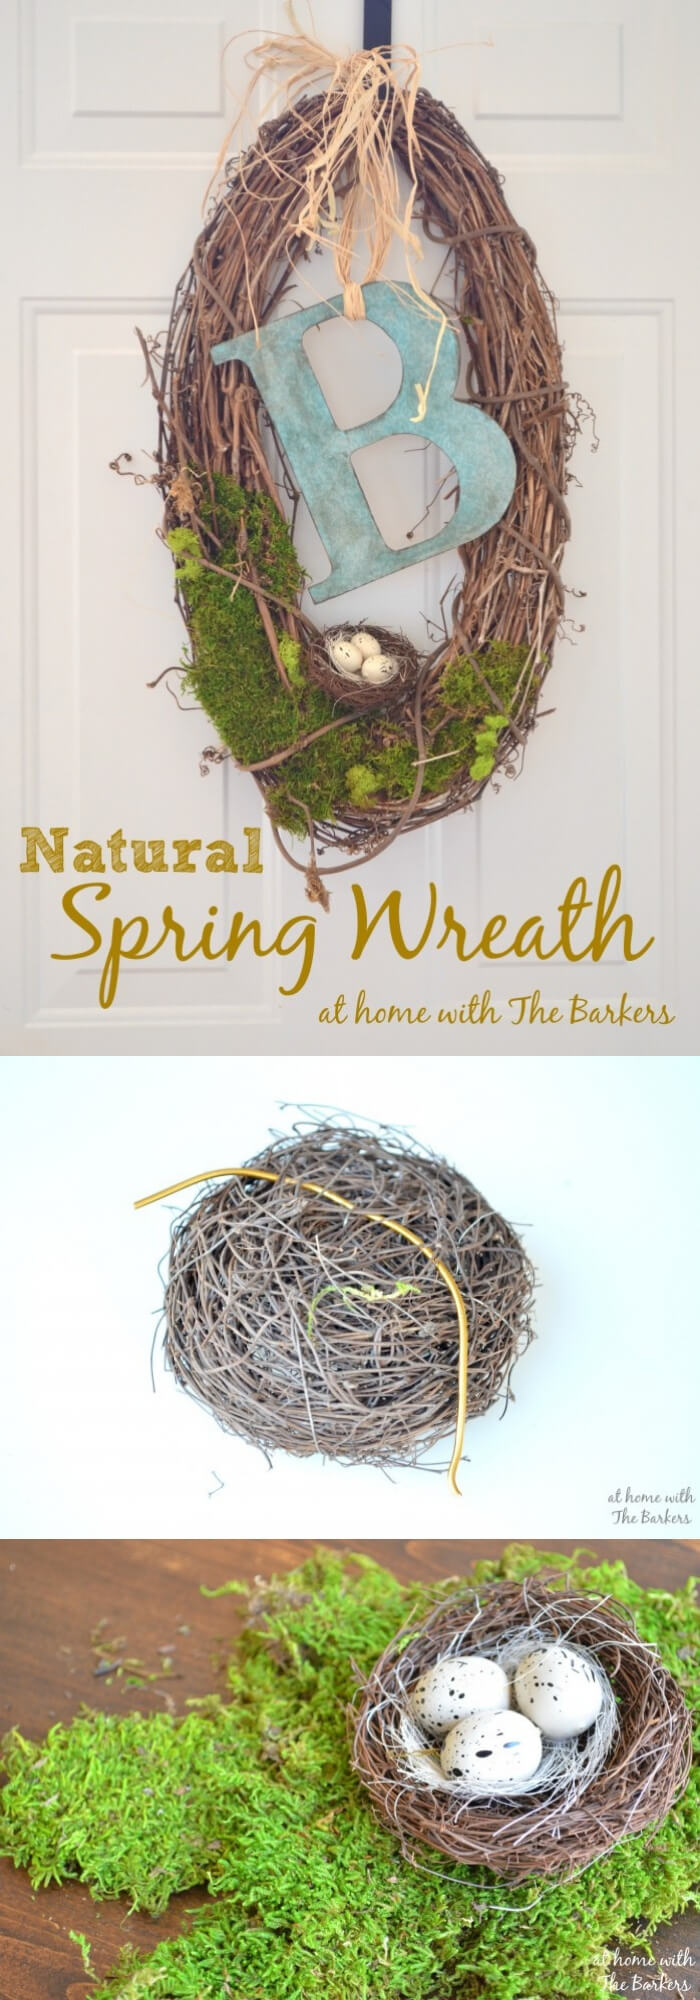 Easy and Simple DIY Spring Wreath Ideas | Natural Spring Wreath for front door